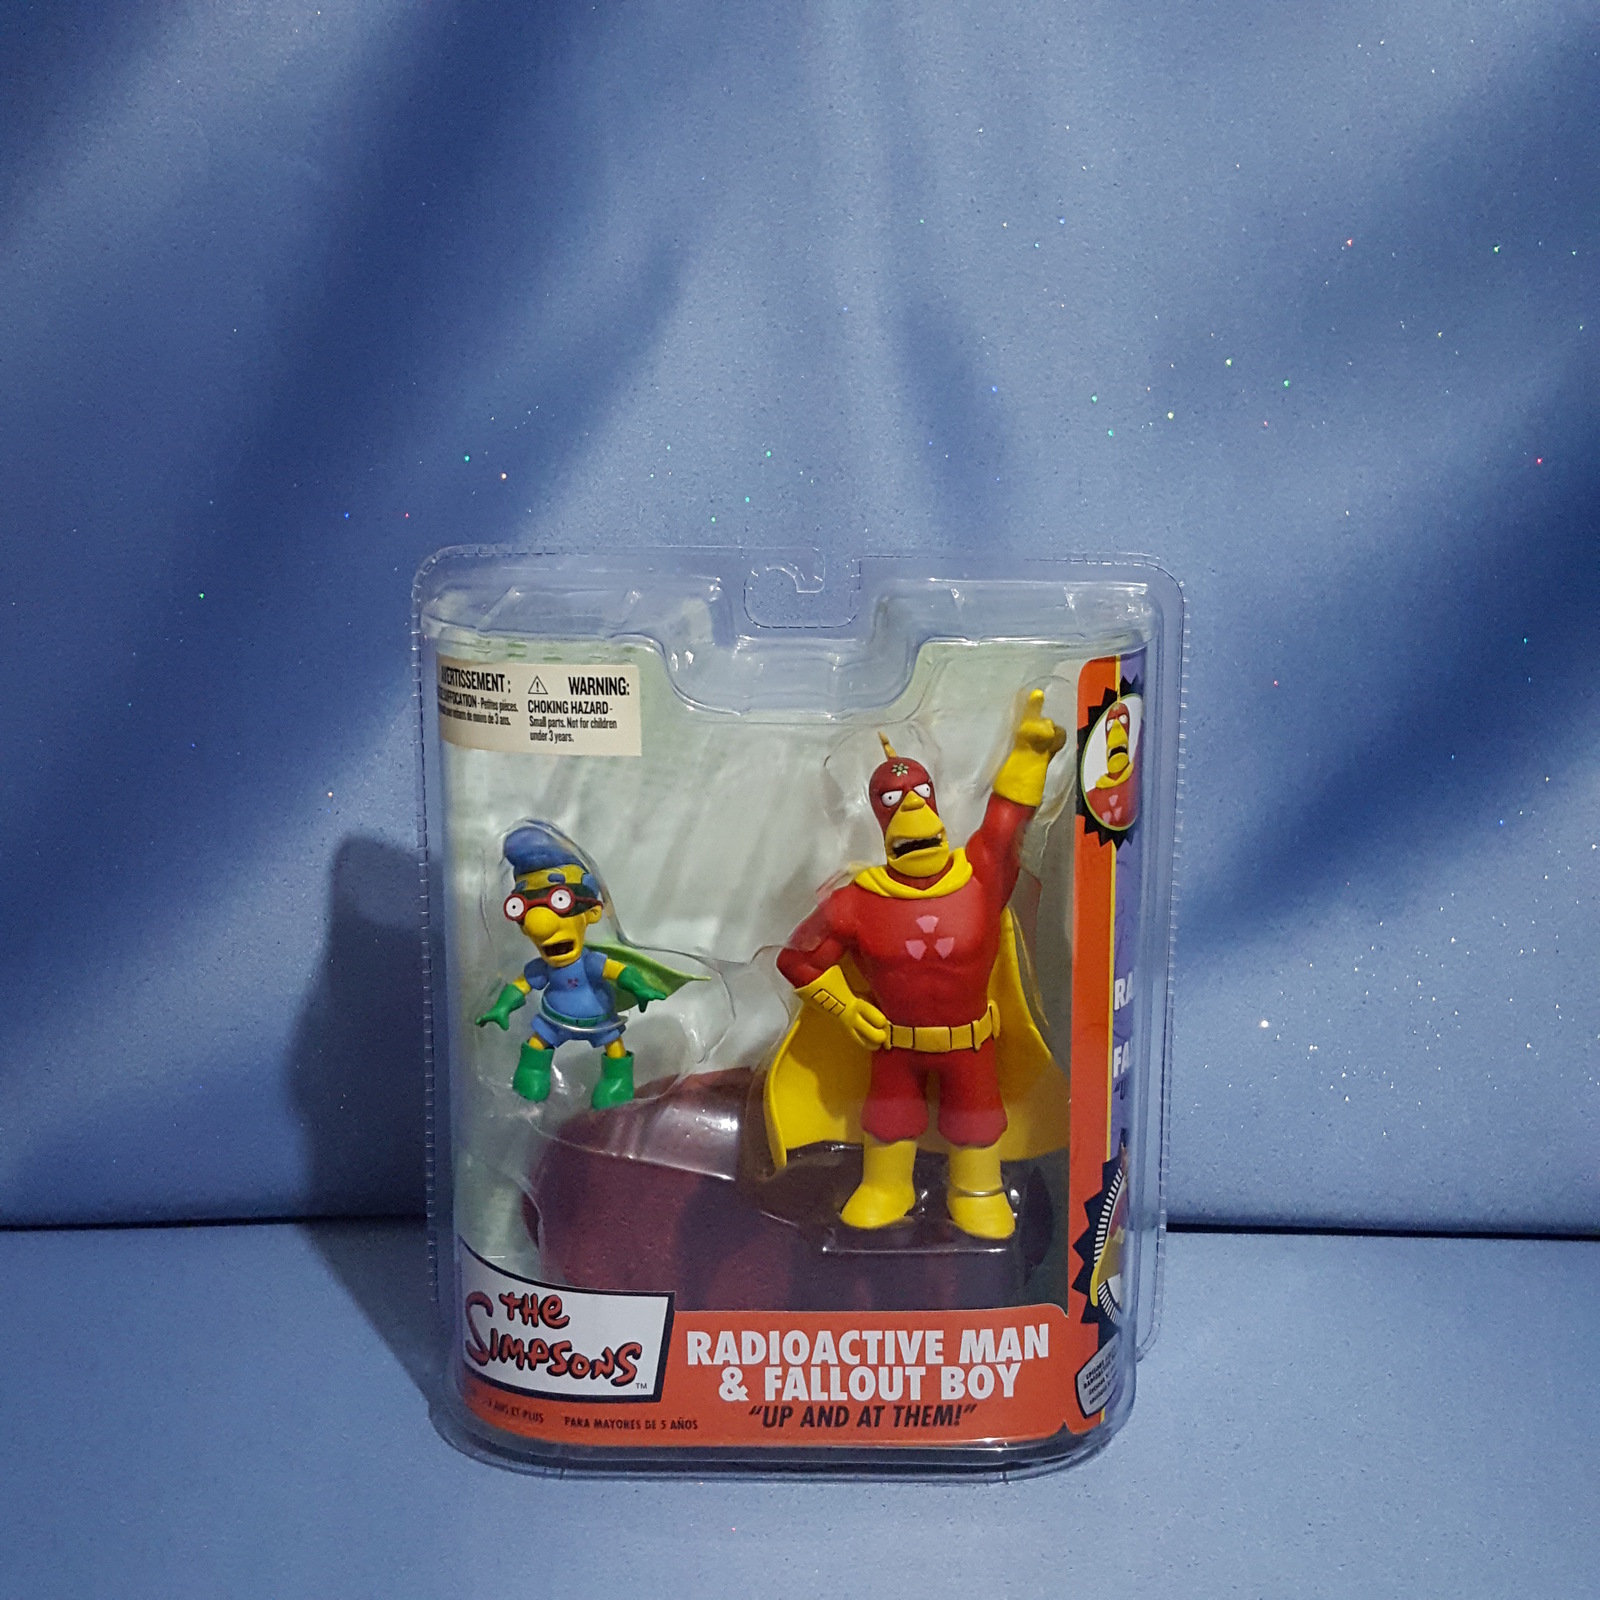 The Simpsons Radioactive Man and Fallout Boy Action Figures by McFarlane Toys. - $95.00